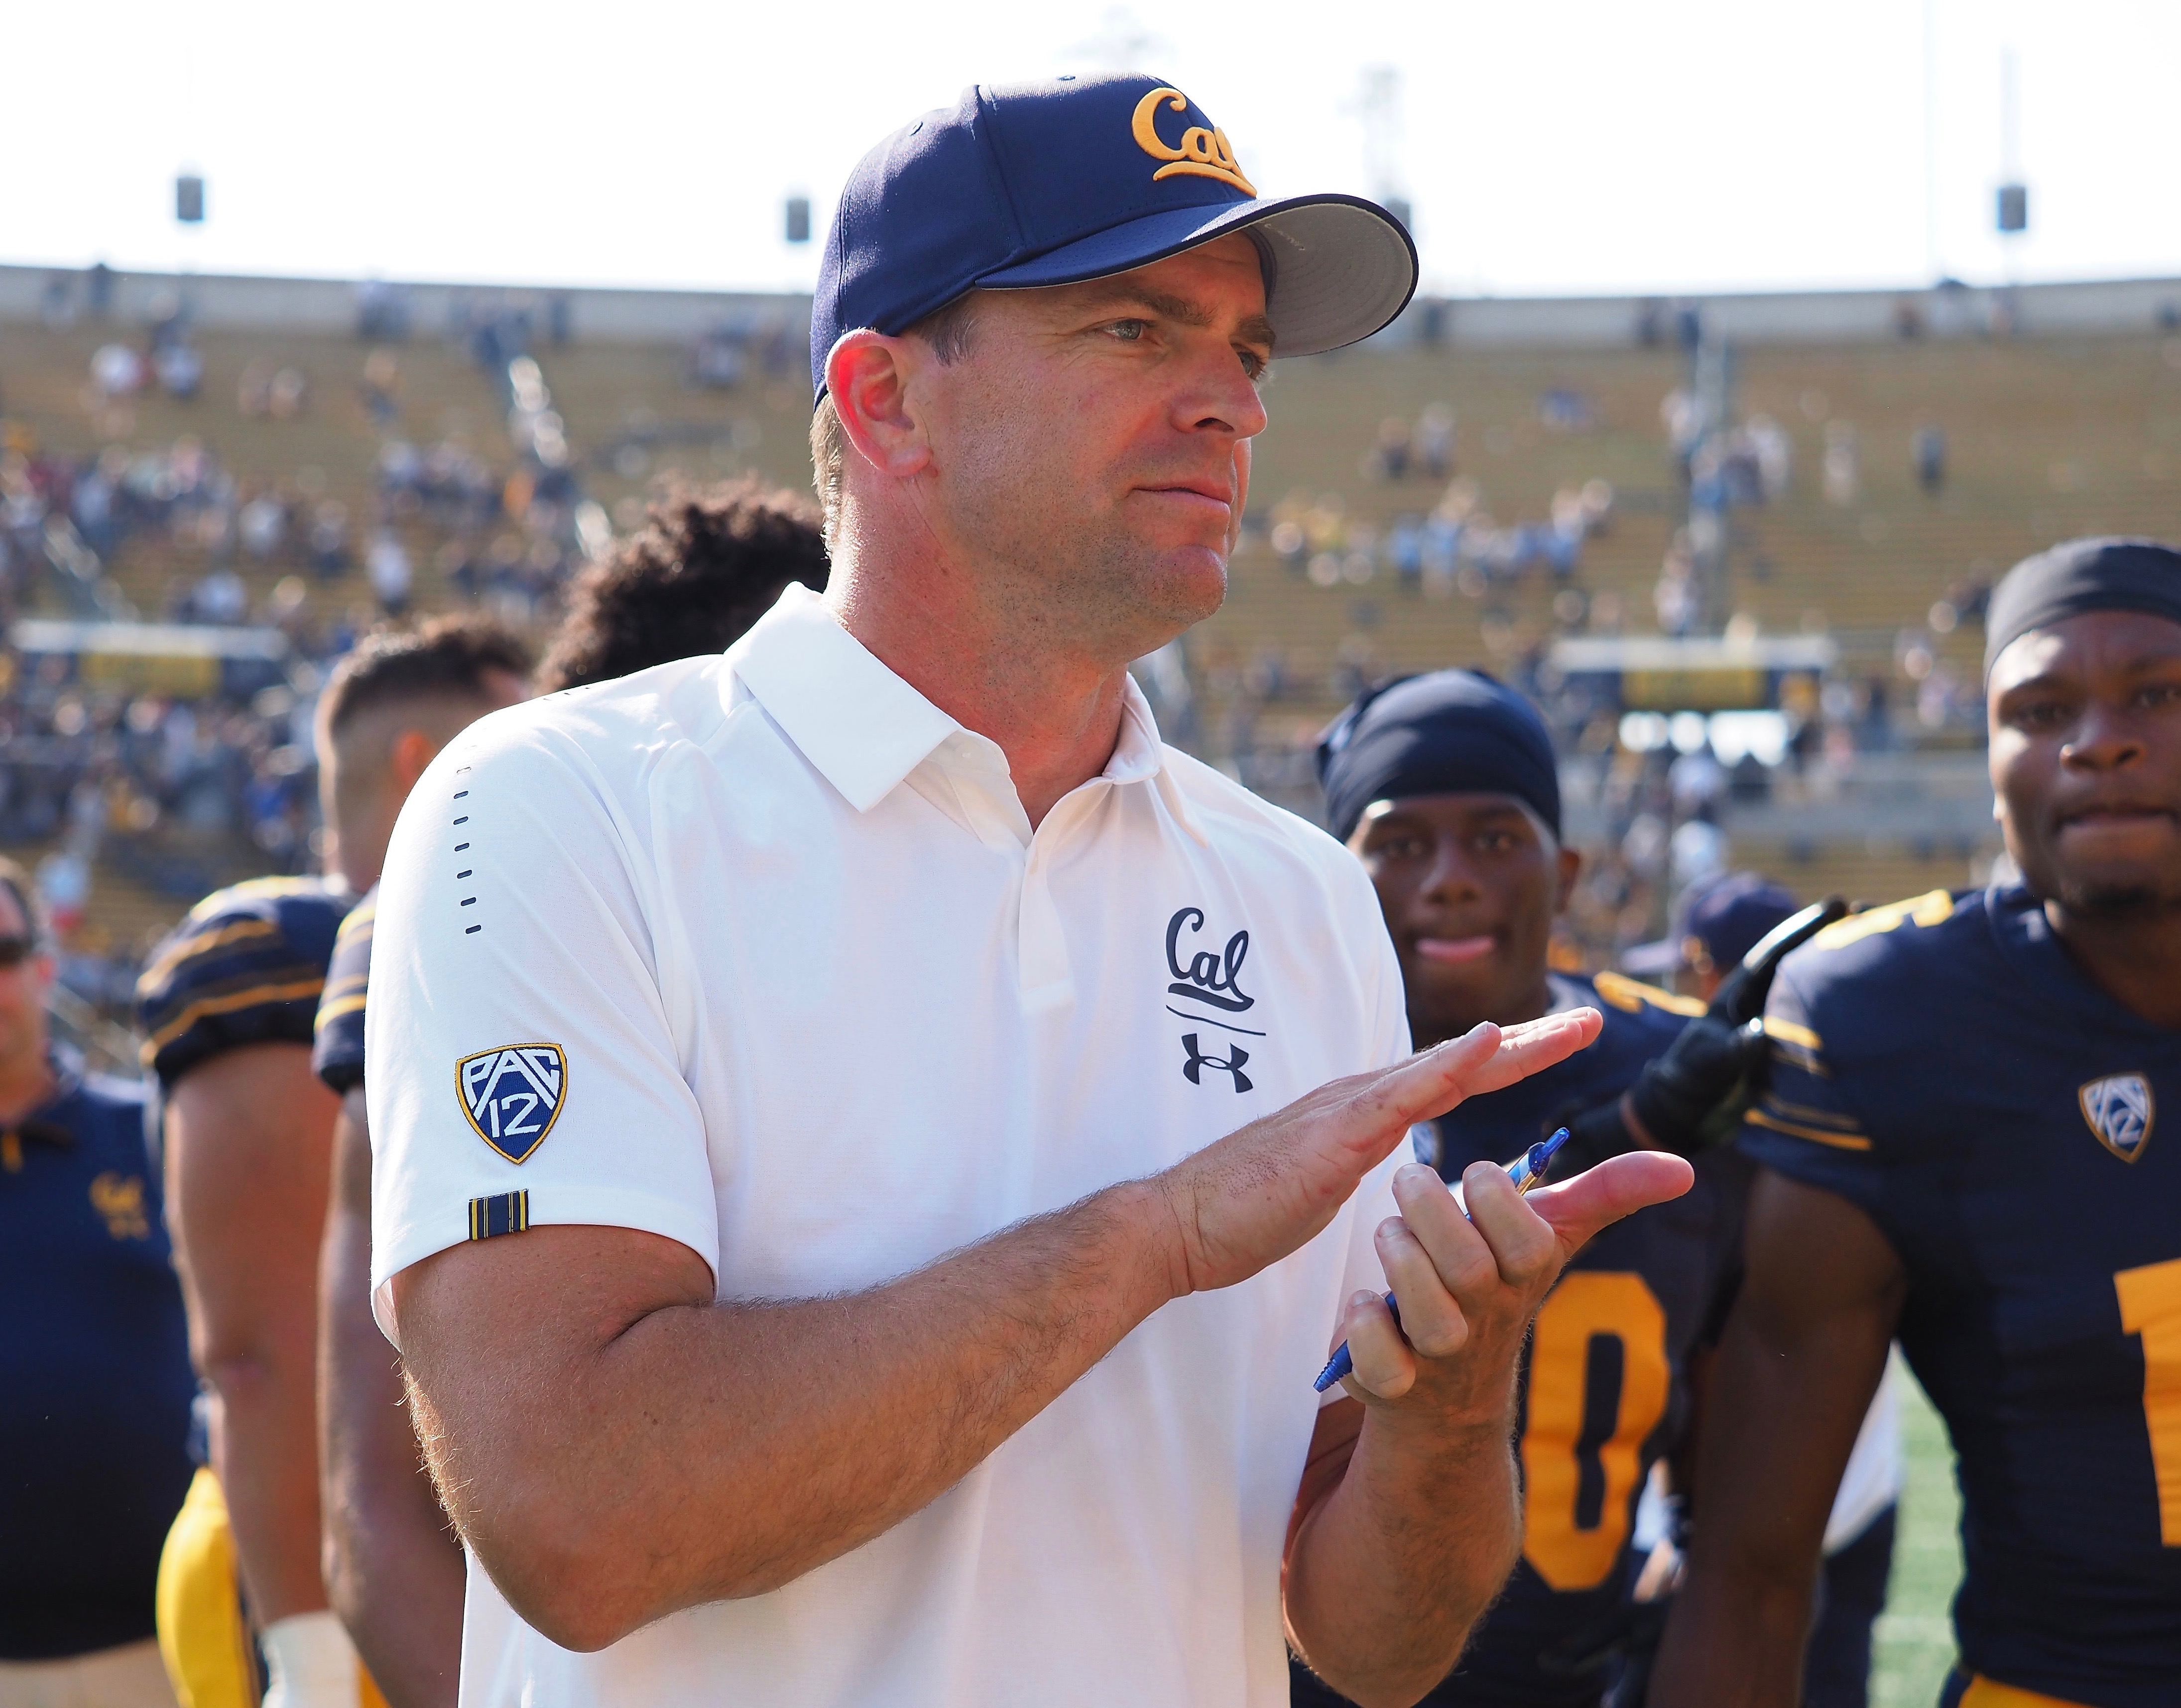 Everything else is going to pieces but Cal recruiting is on the upswing